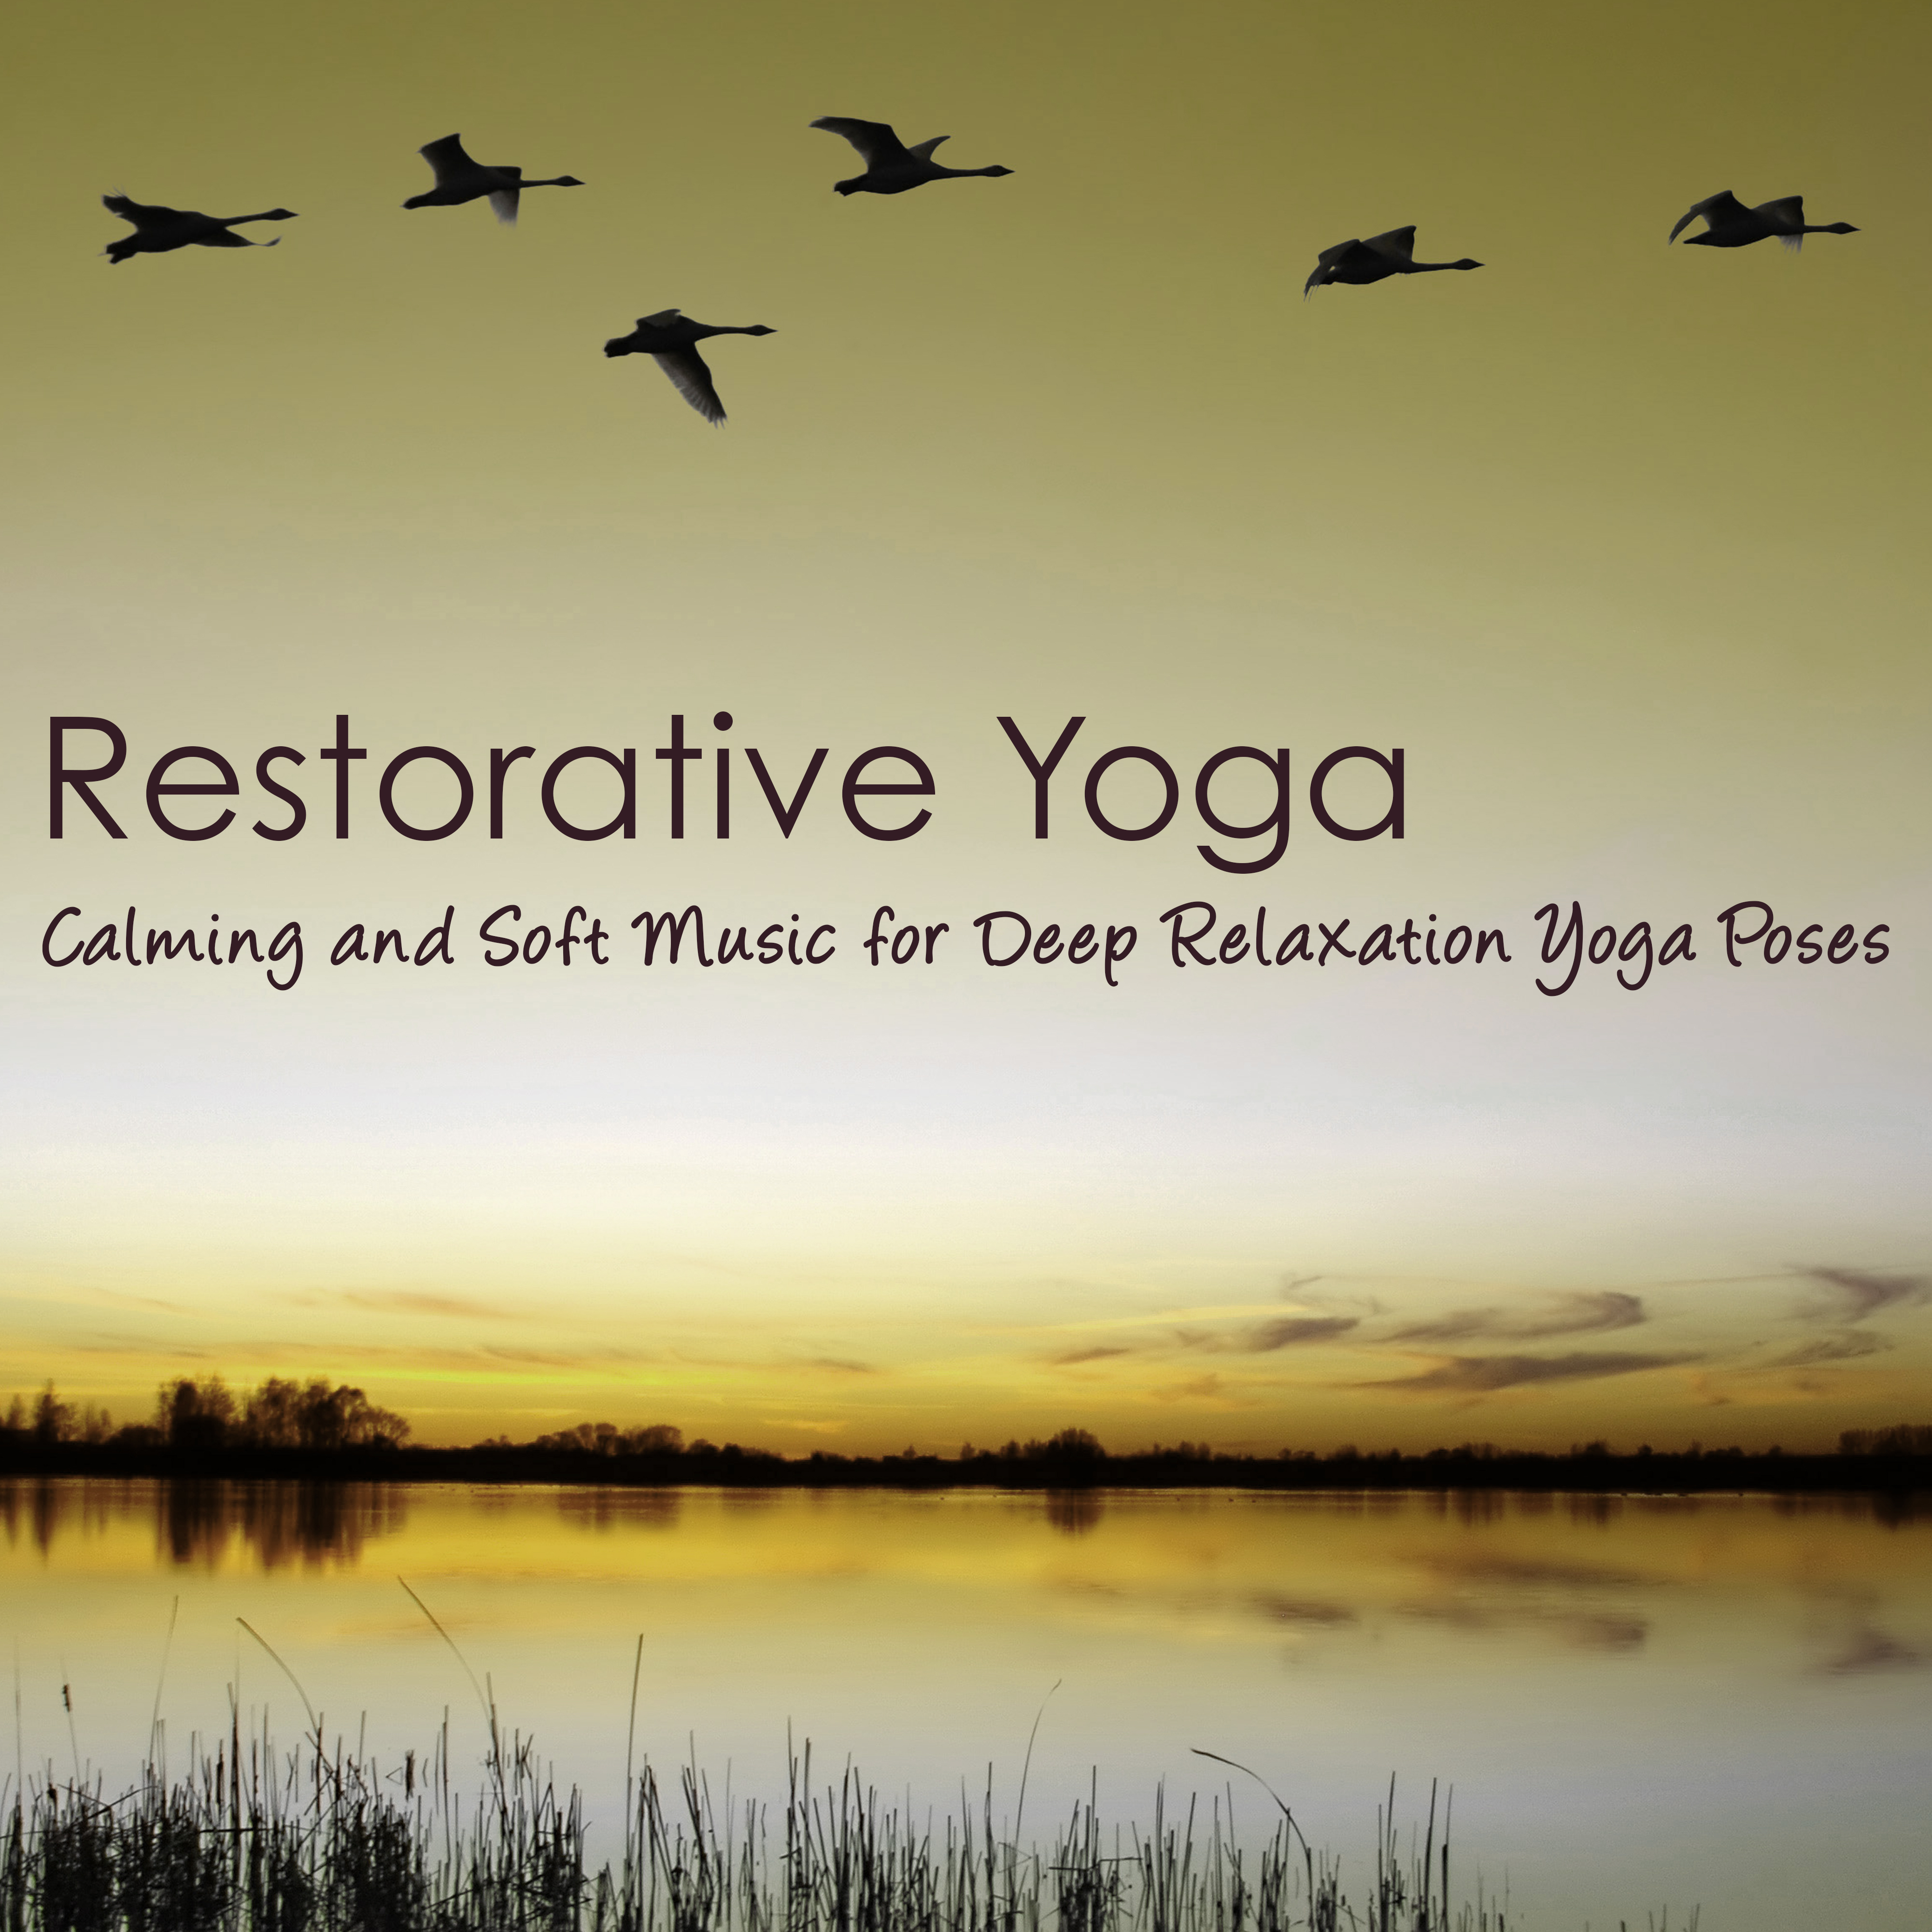 Restorative Yoga - Calming and Soft Music for Deep Relaxation Yoga Poses